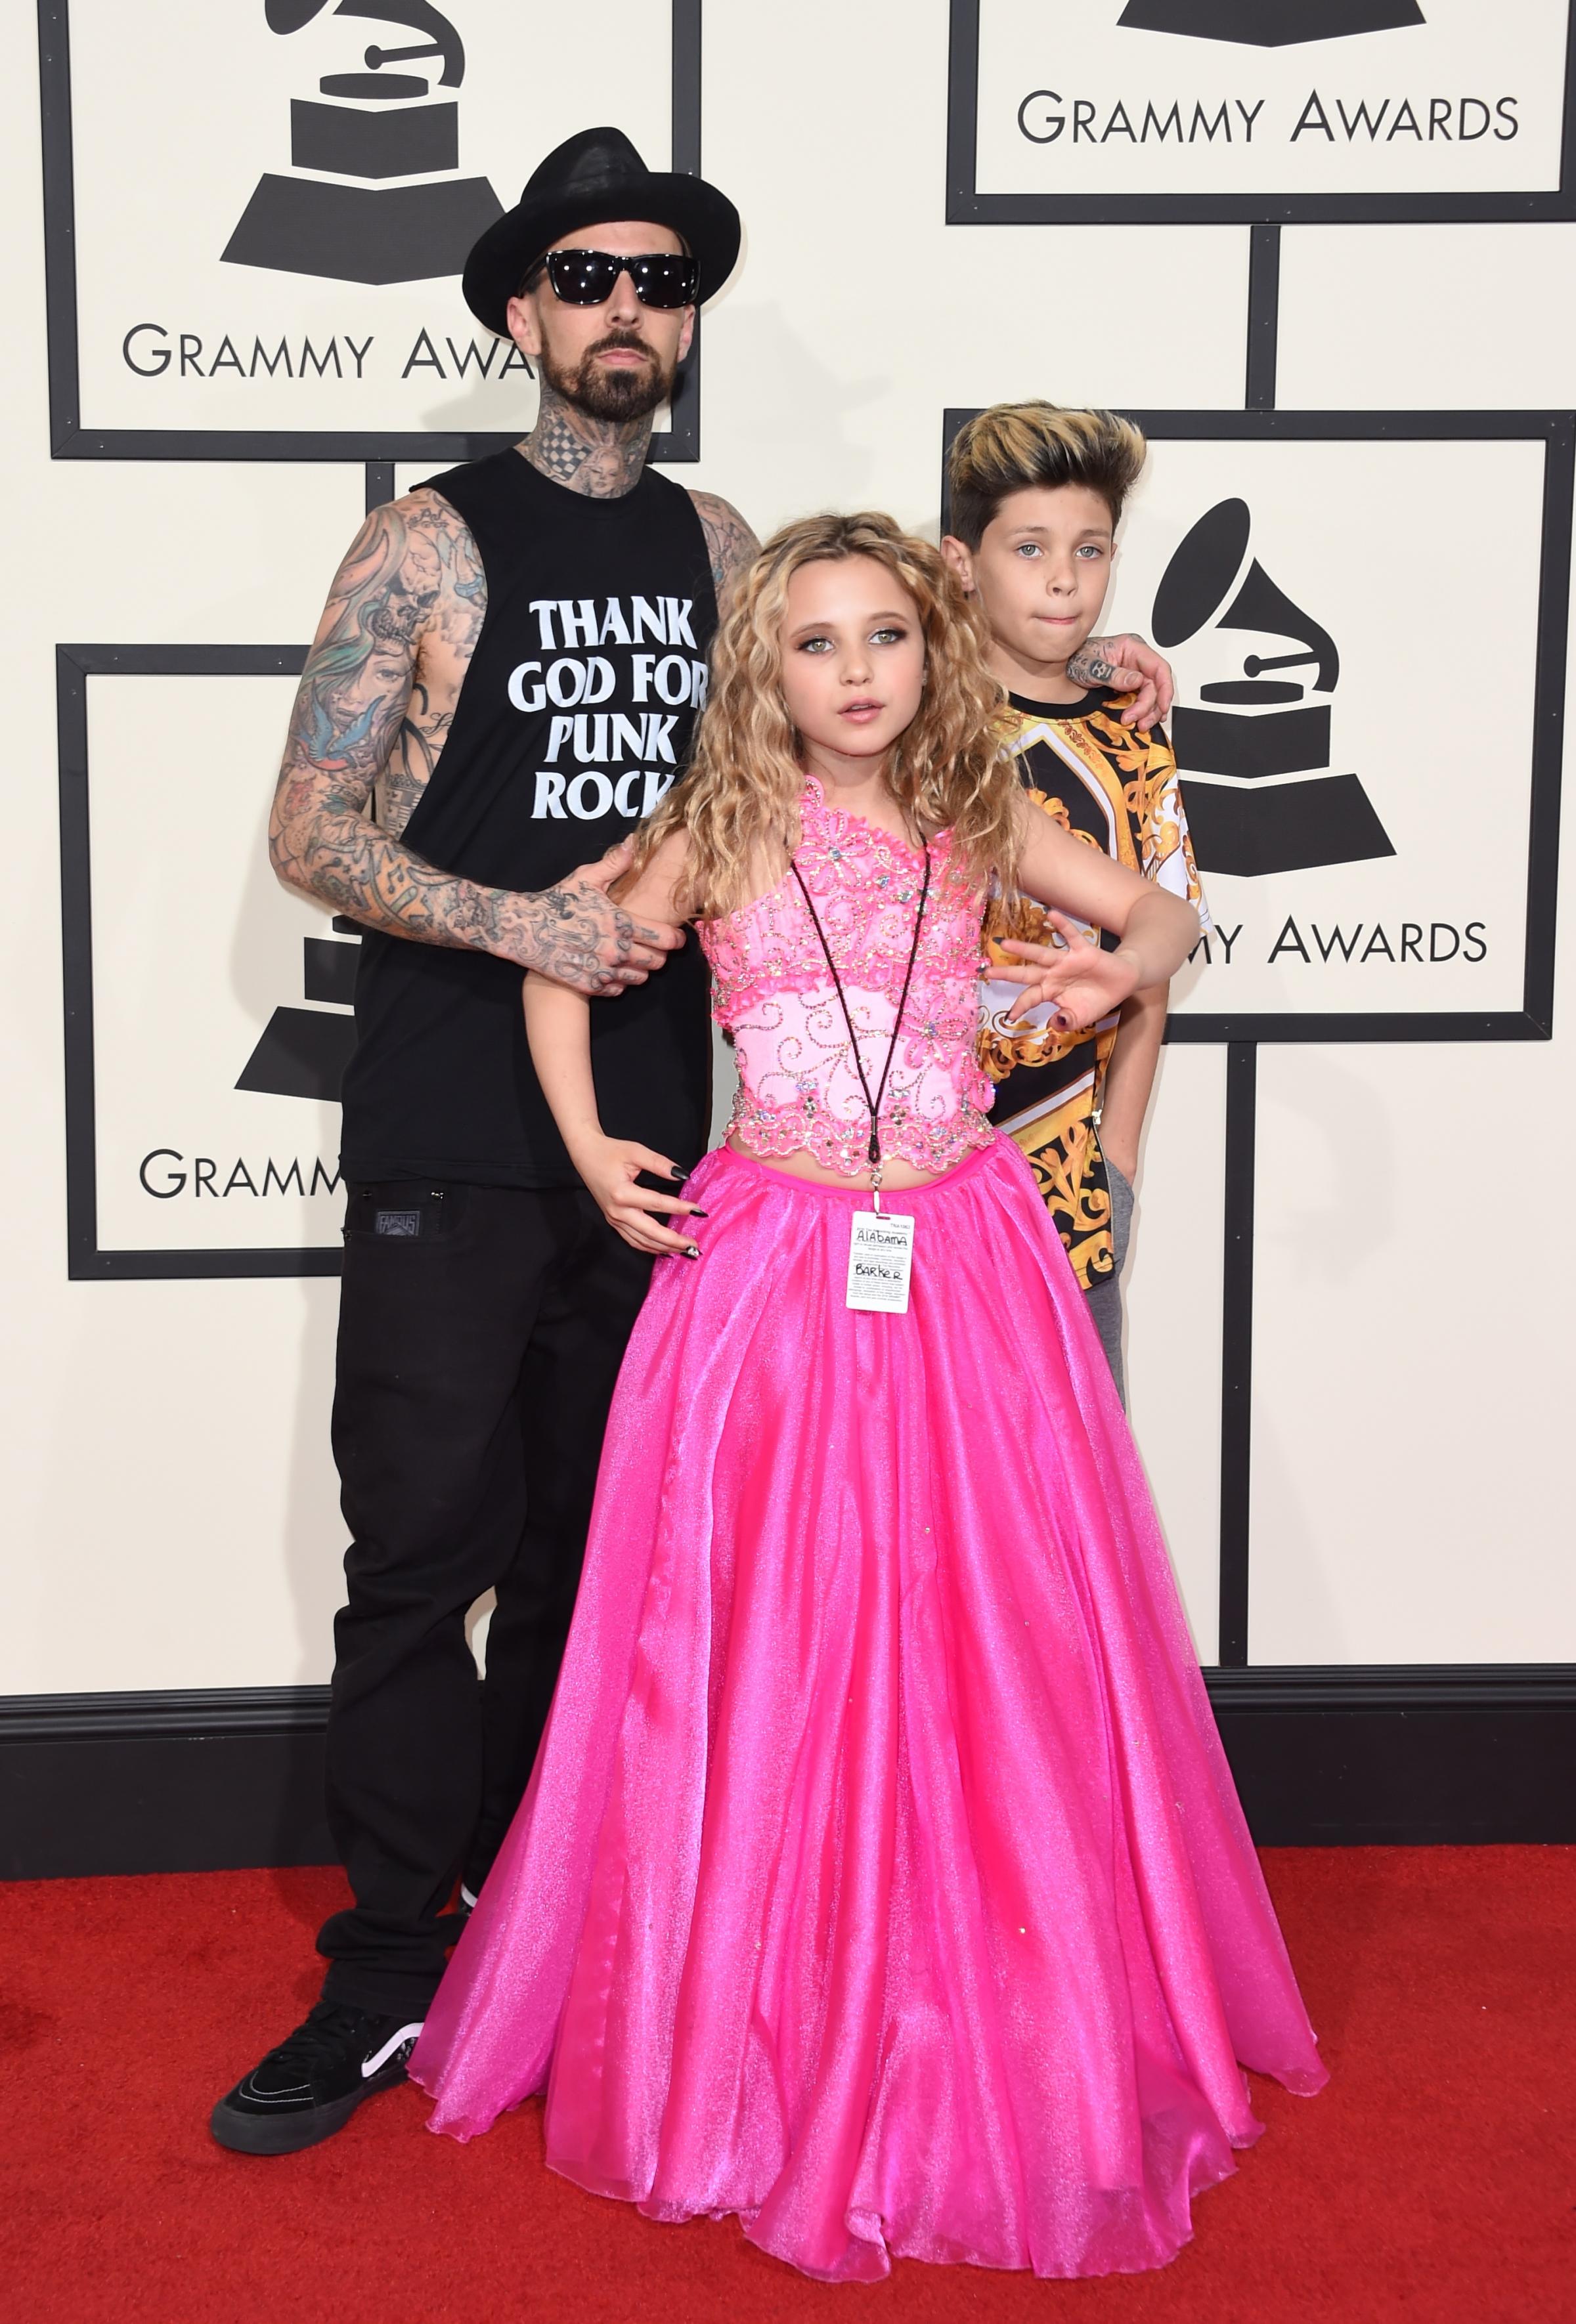 Travis Barker and his children attend the 58th GRAMMY Awards at Staples Center on Feb. 15, 2016 in Los Angeles.